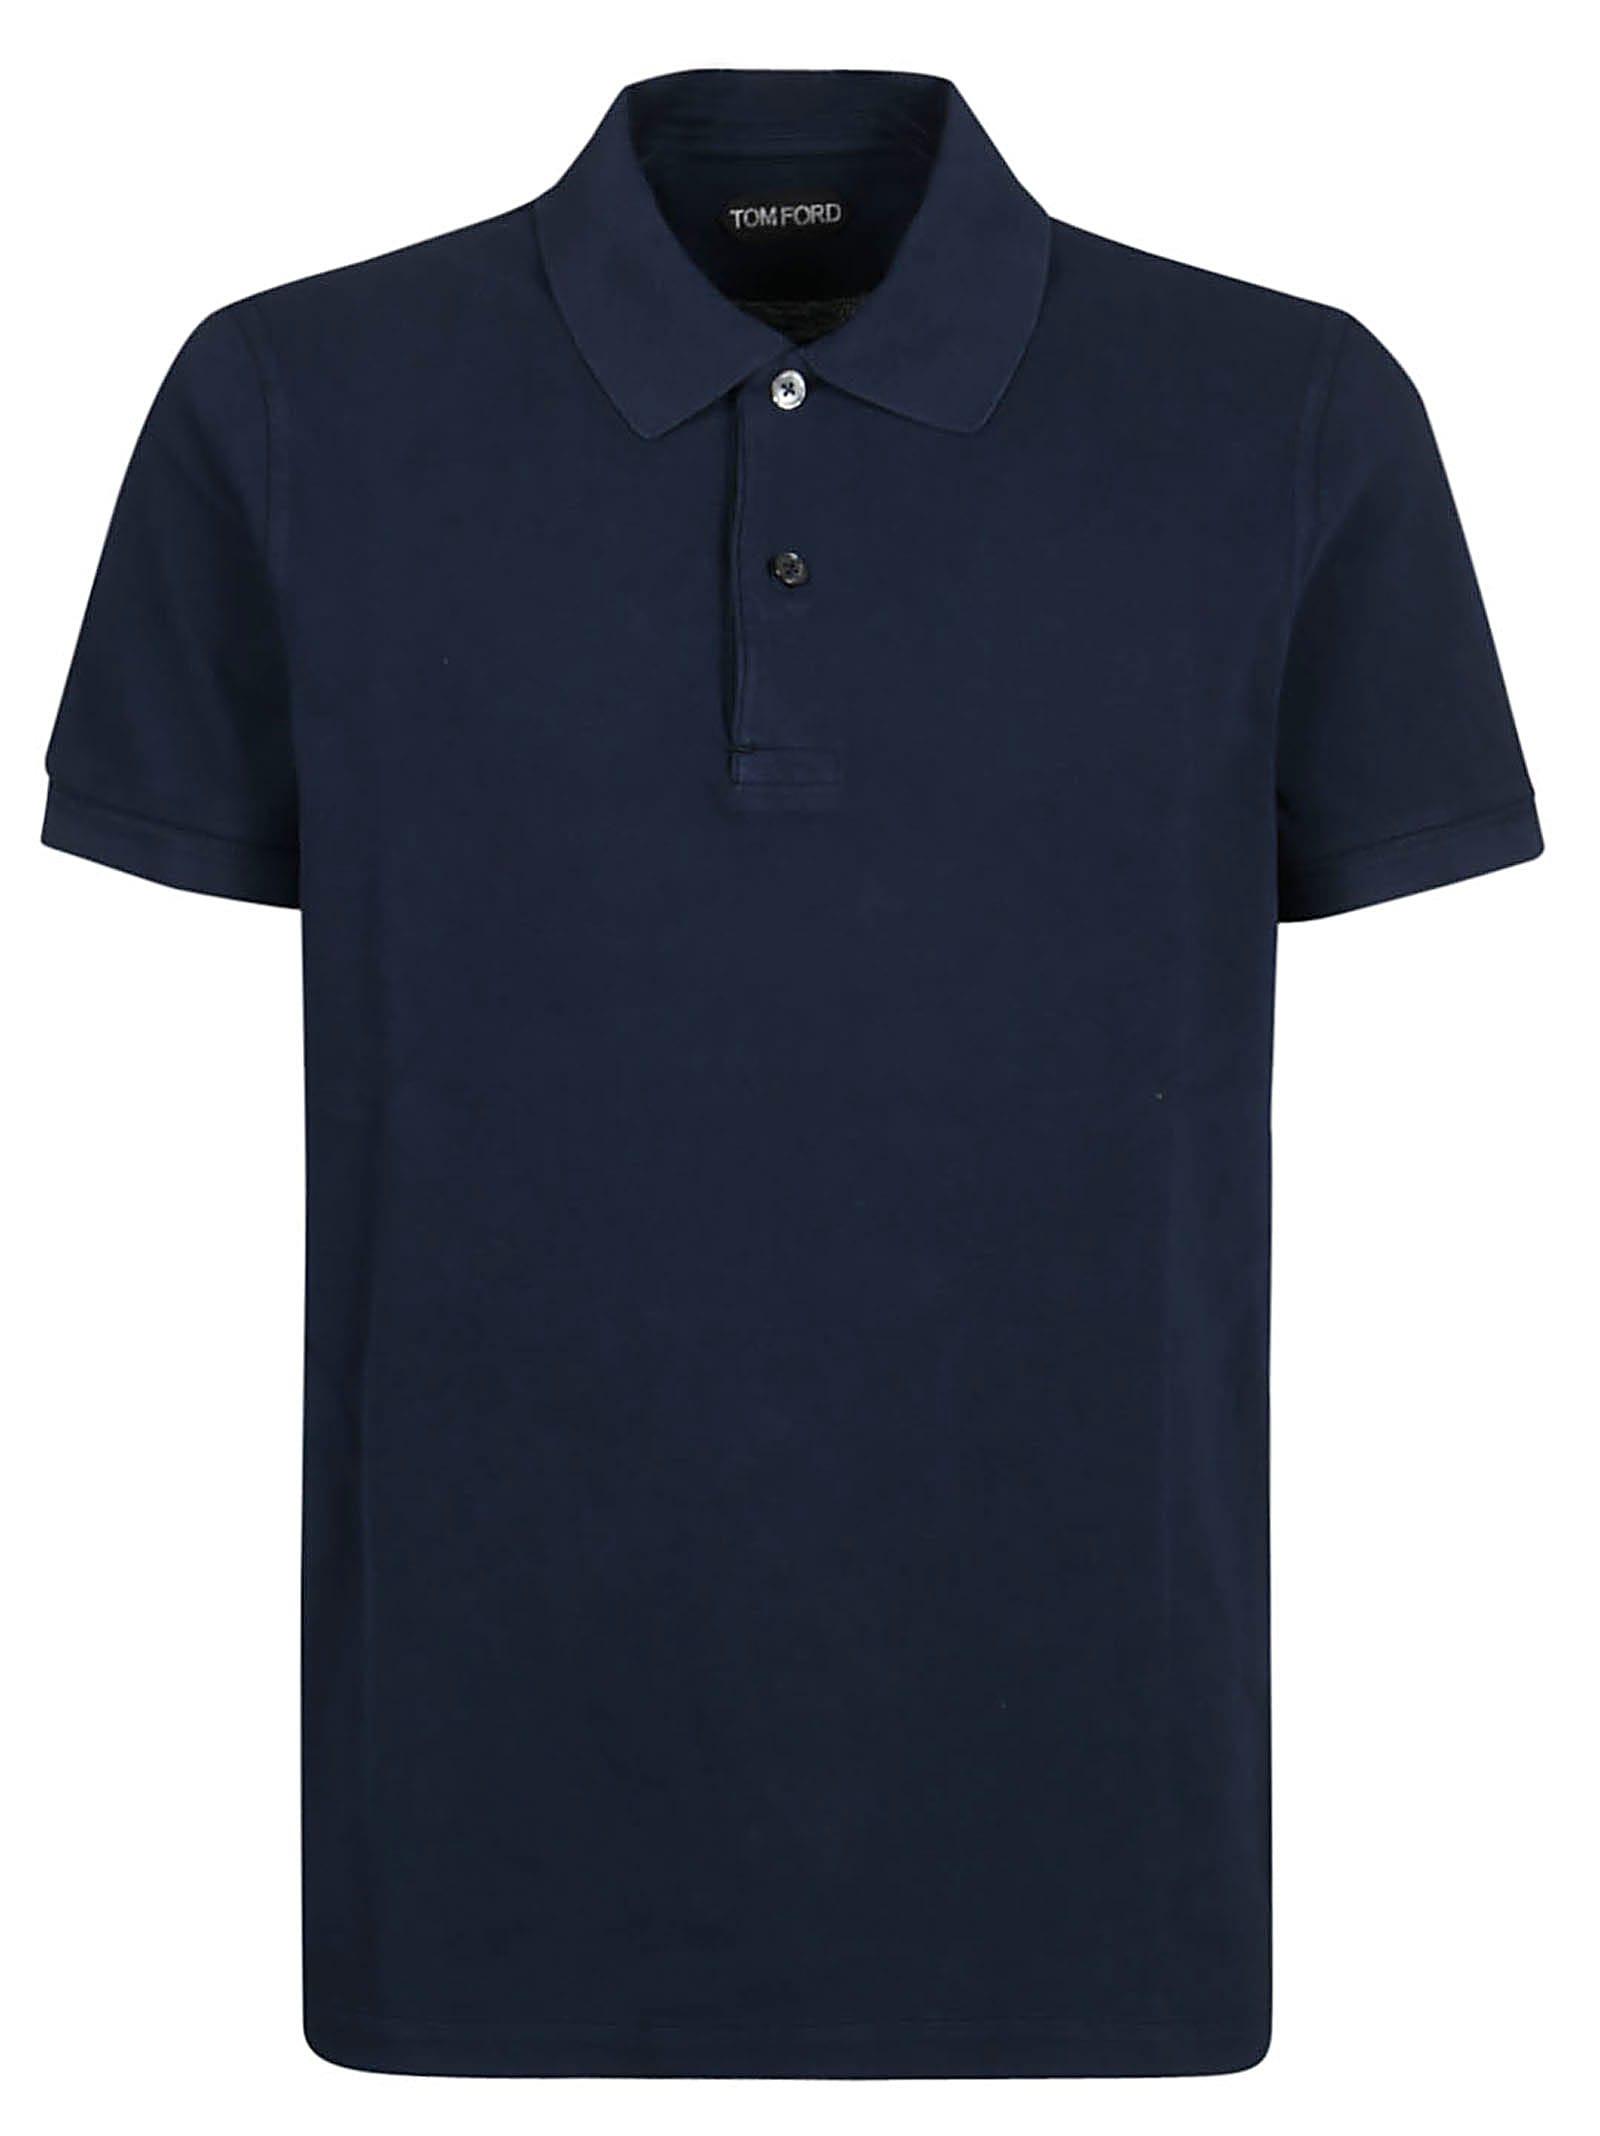 Tom Ford Cotton Tennis Piquet Polo in Blue for Men - Save 25% | Lyst